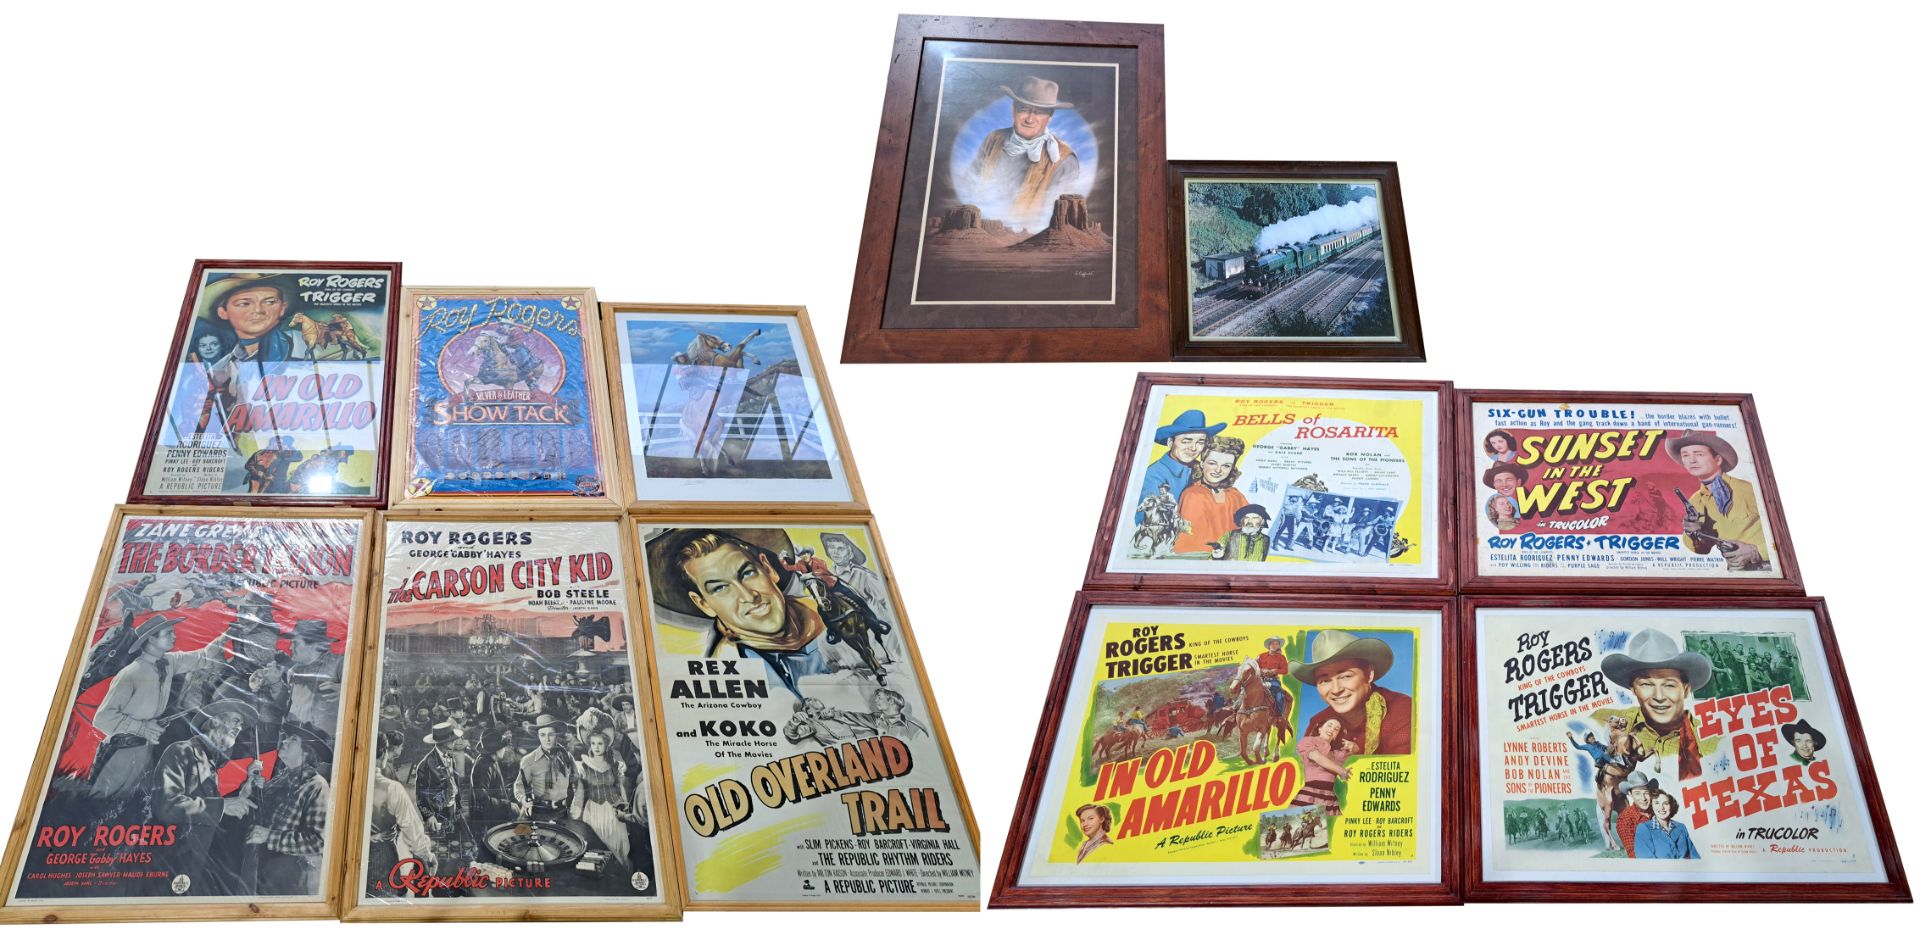 Roy Rogers, Rex Allen, John Wayne & other framed movie posters and pictures